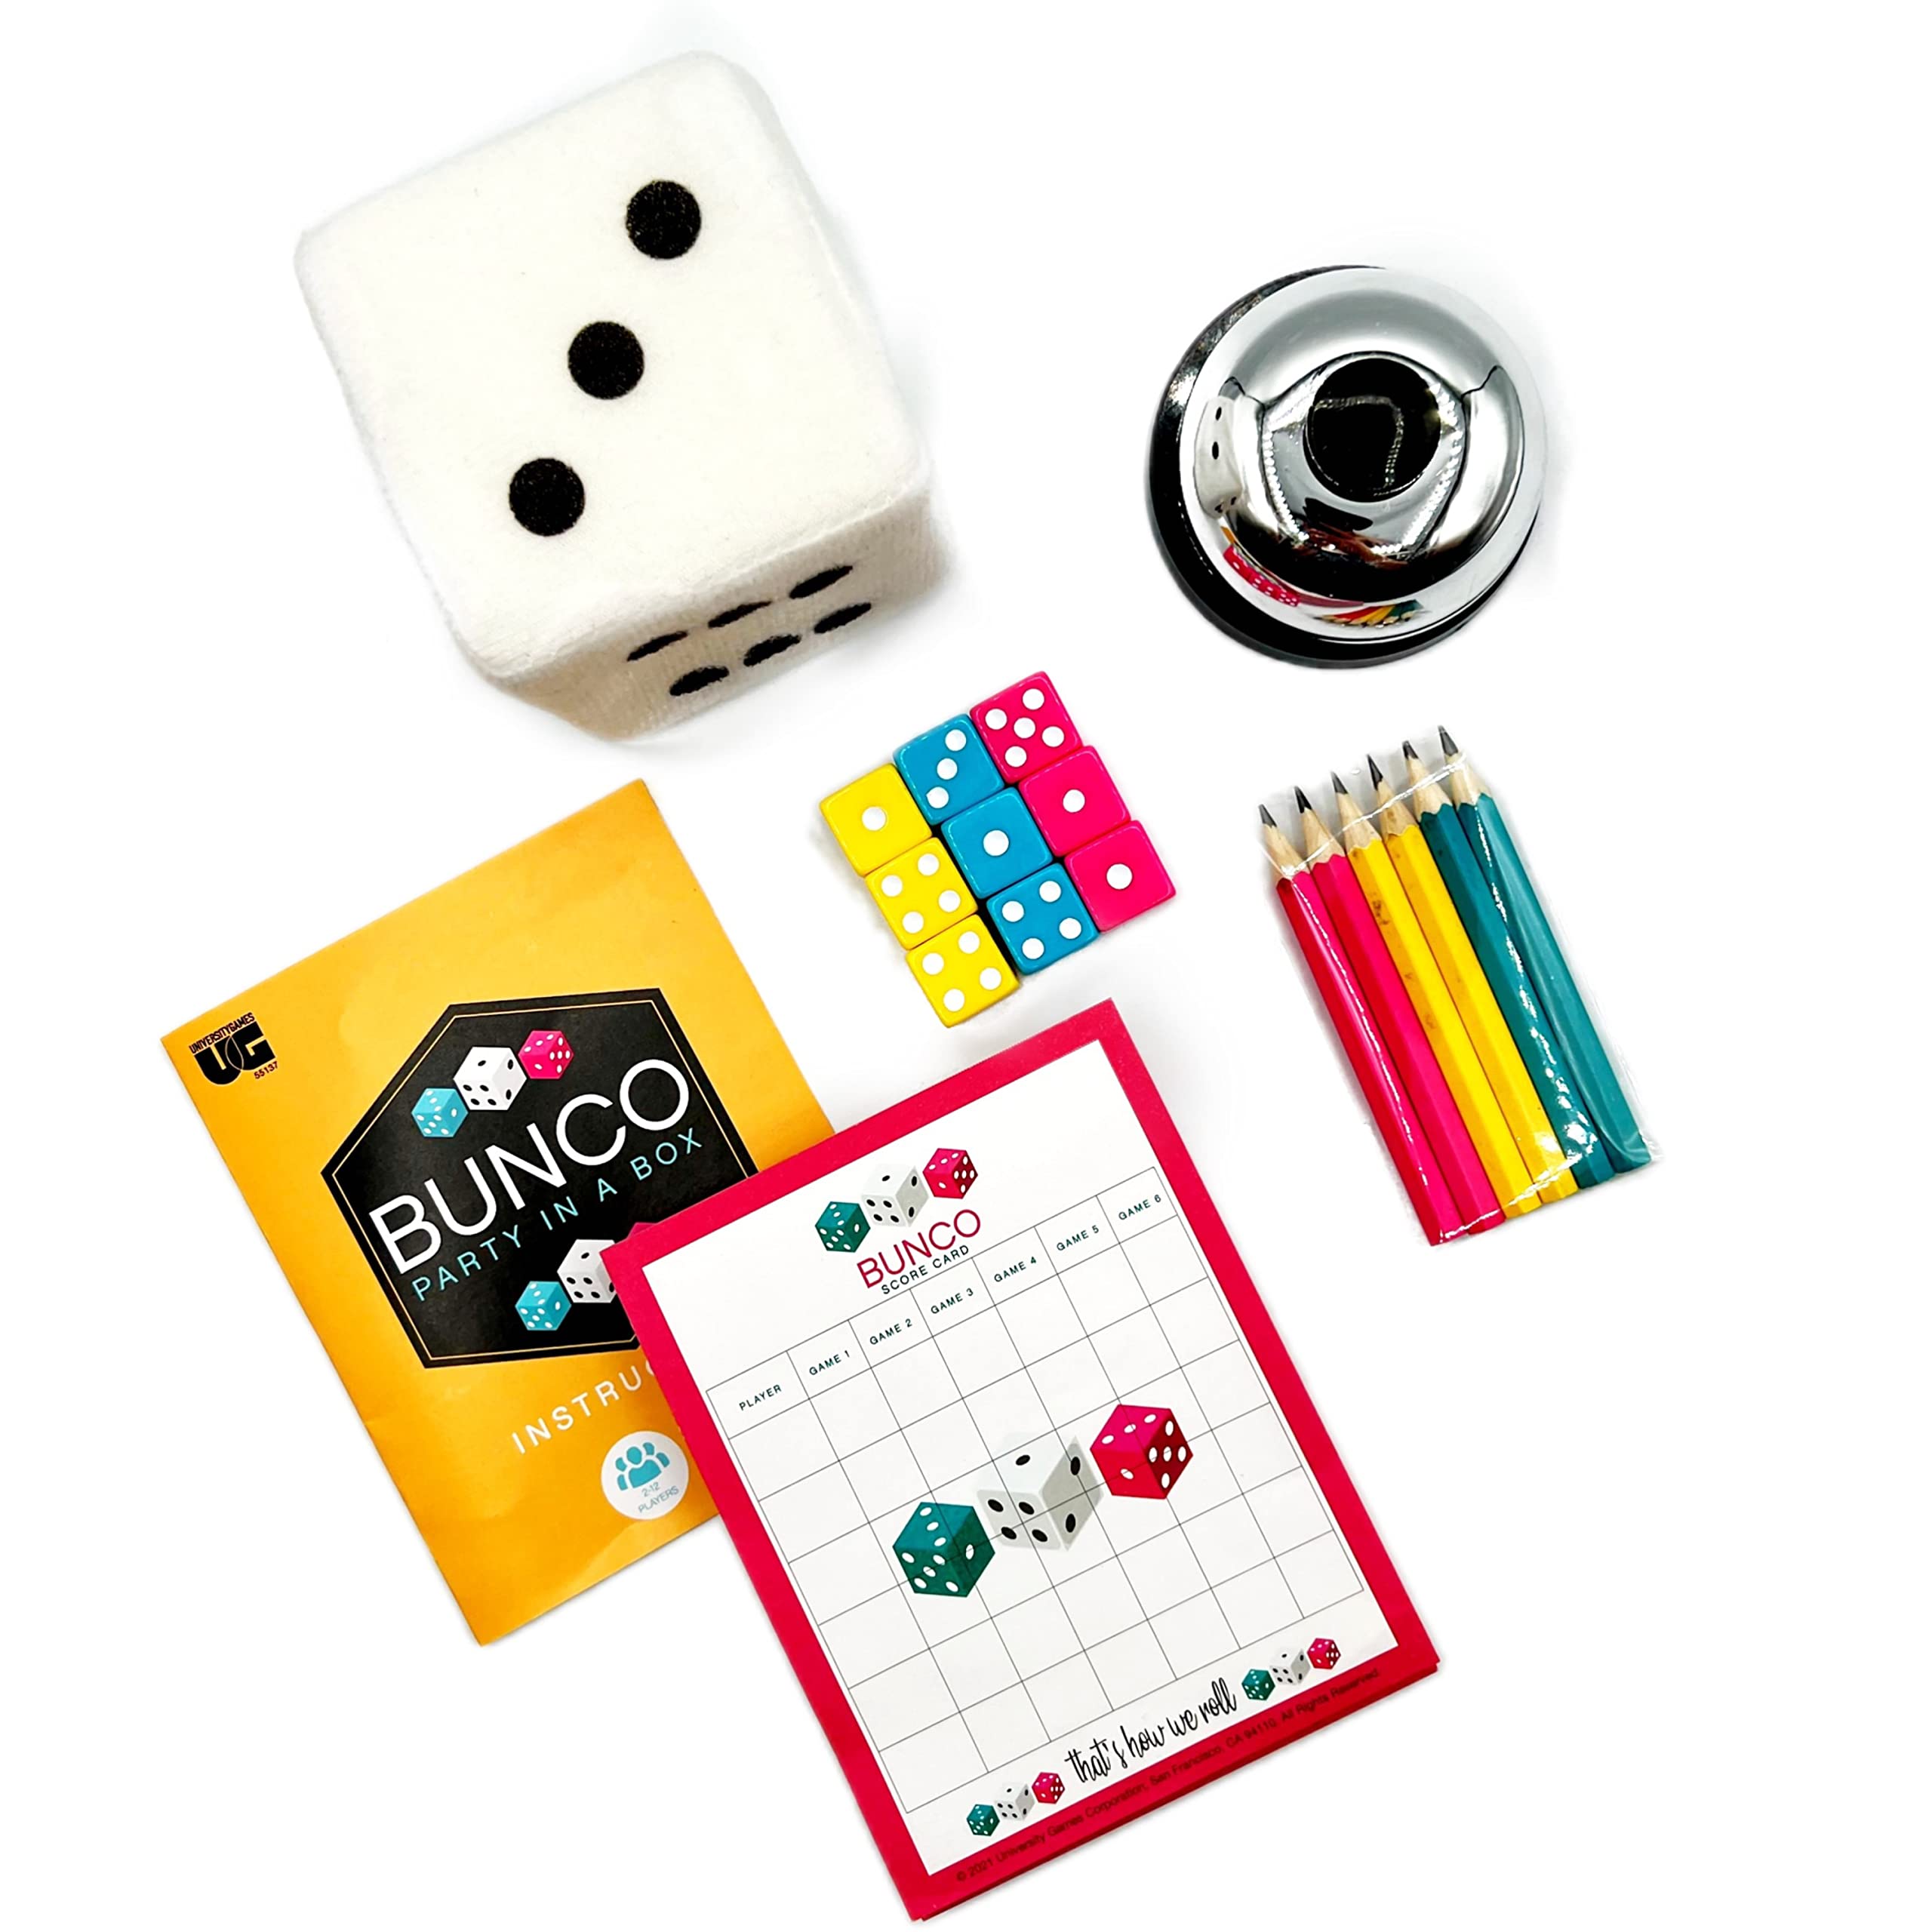 Bunco Party in a Box Game from University Games, for Ladies Night with The Girls, Complete with Fuzzy Die! for 2 to 12 Players Ages 8 and Up